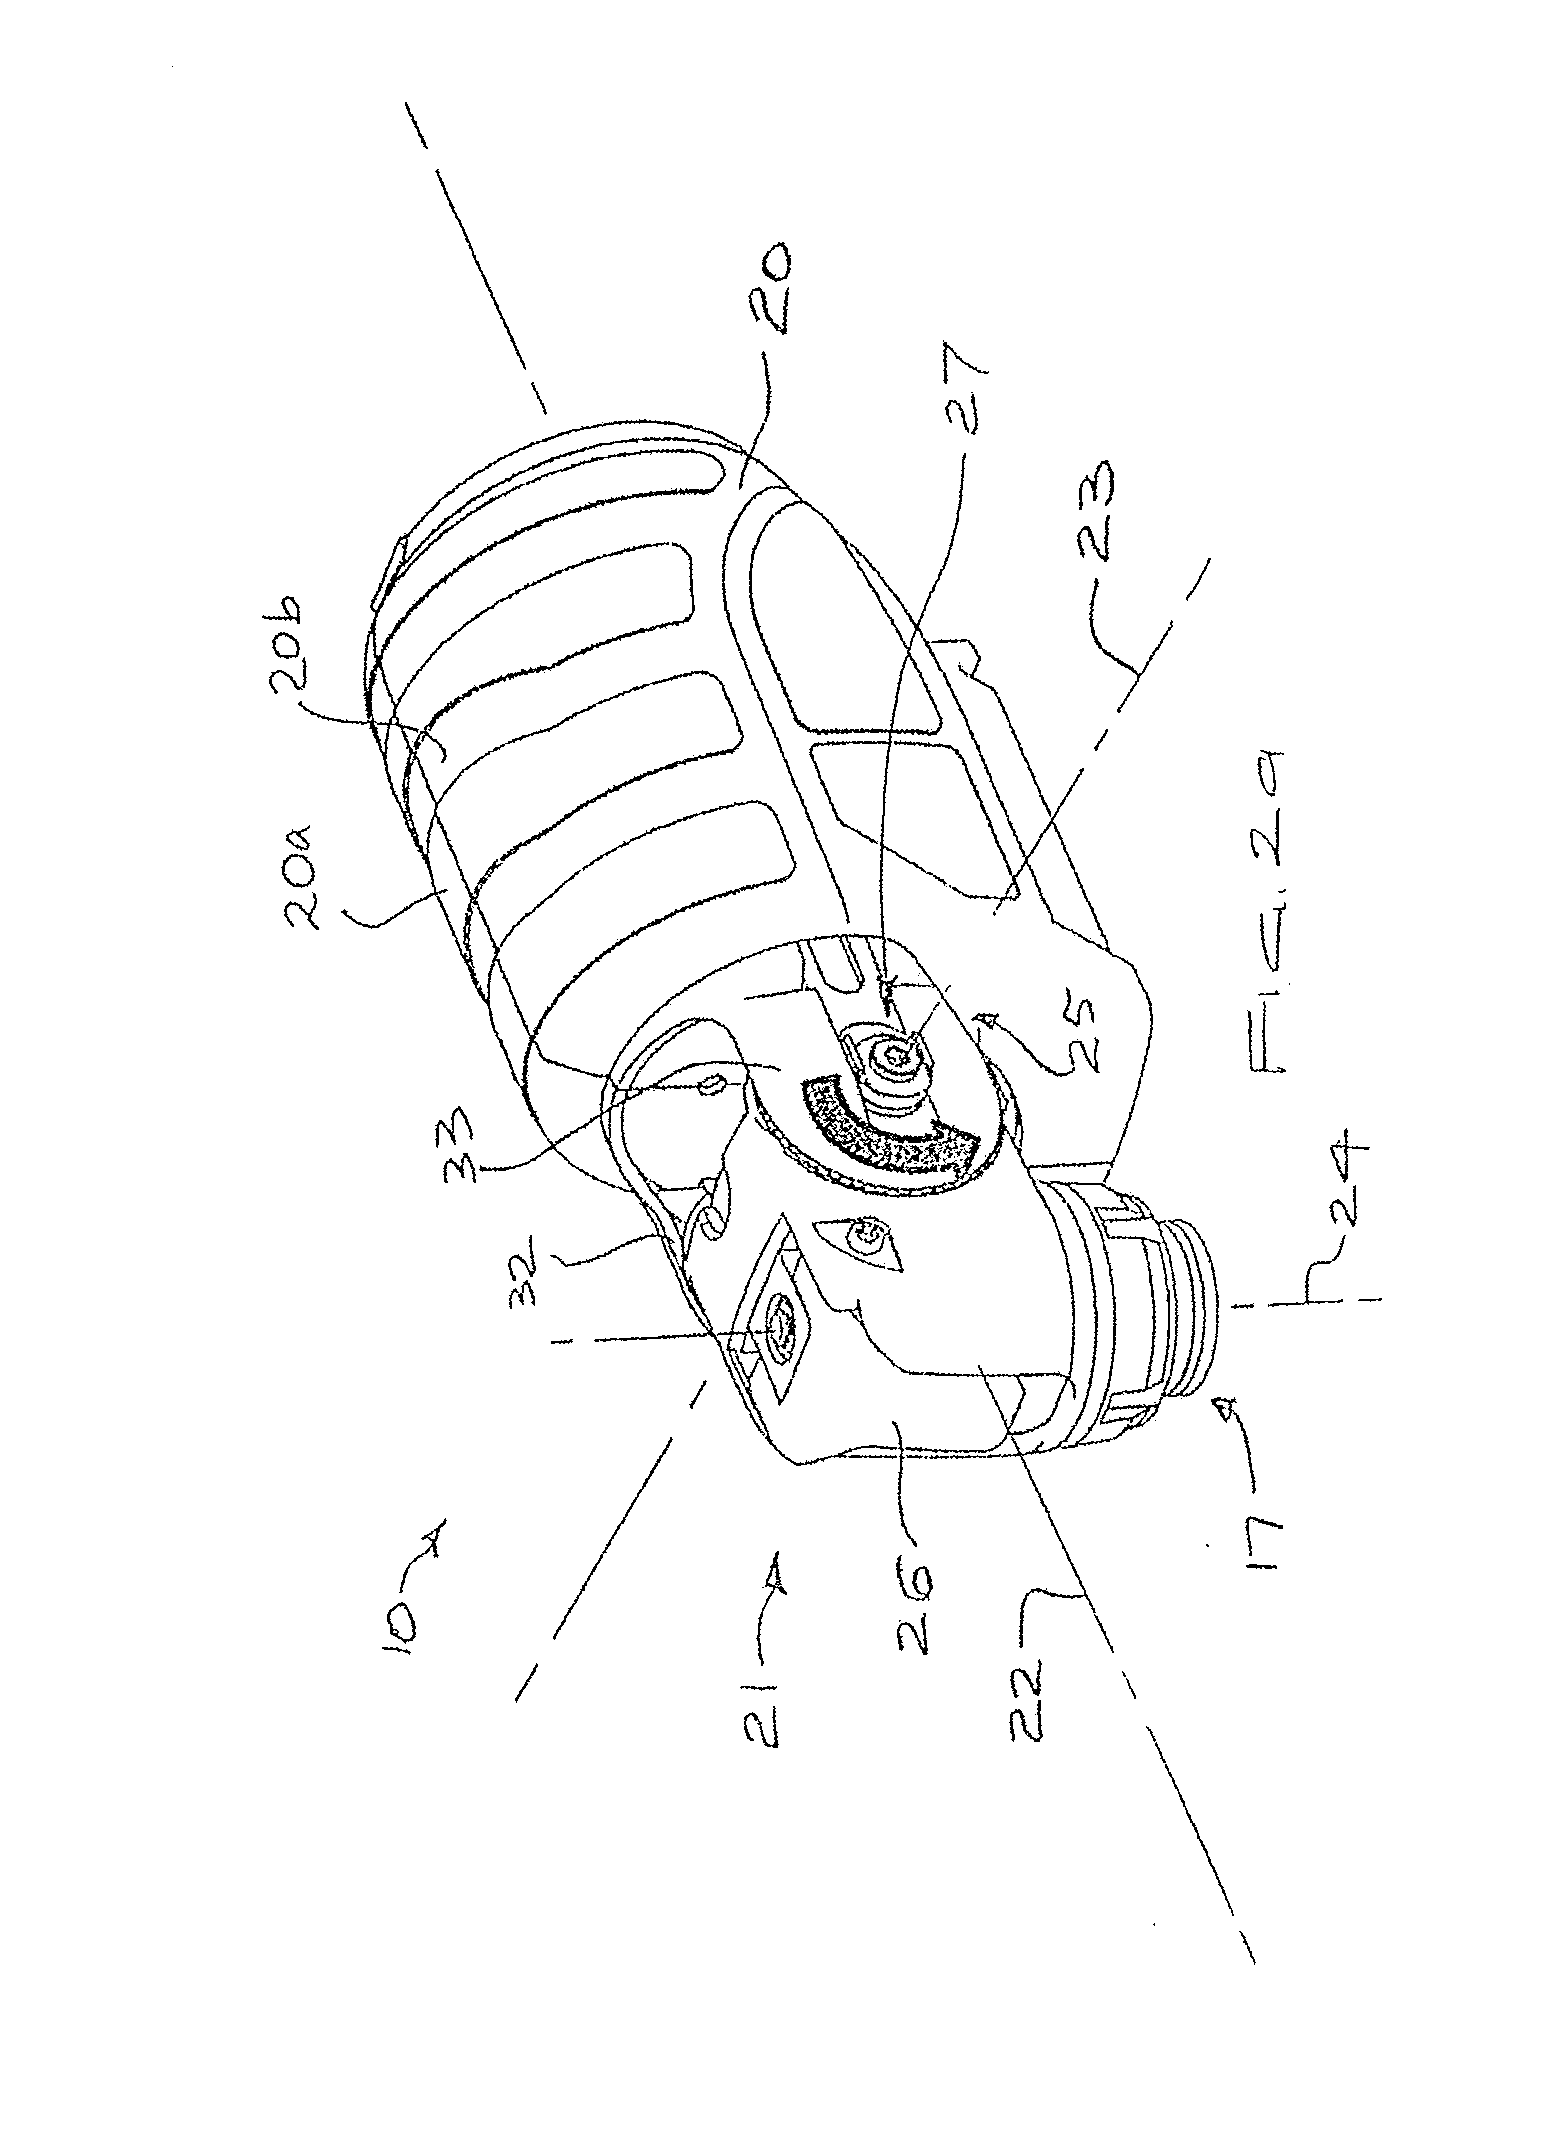 Hand-held oscillatory power tool with two-axis tool mounting